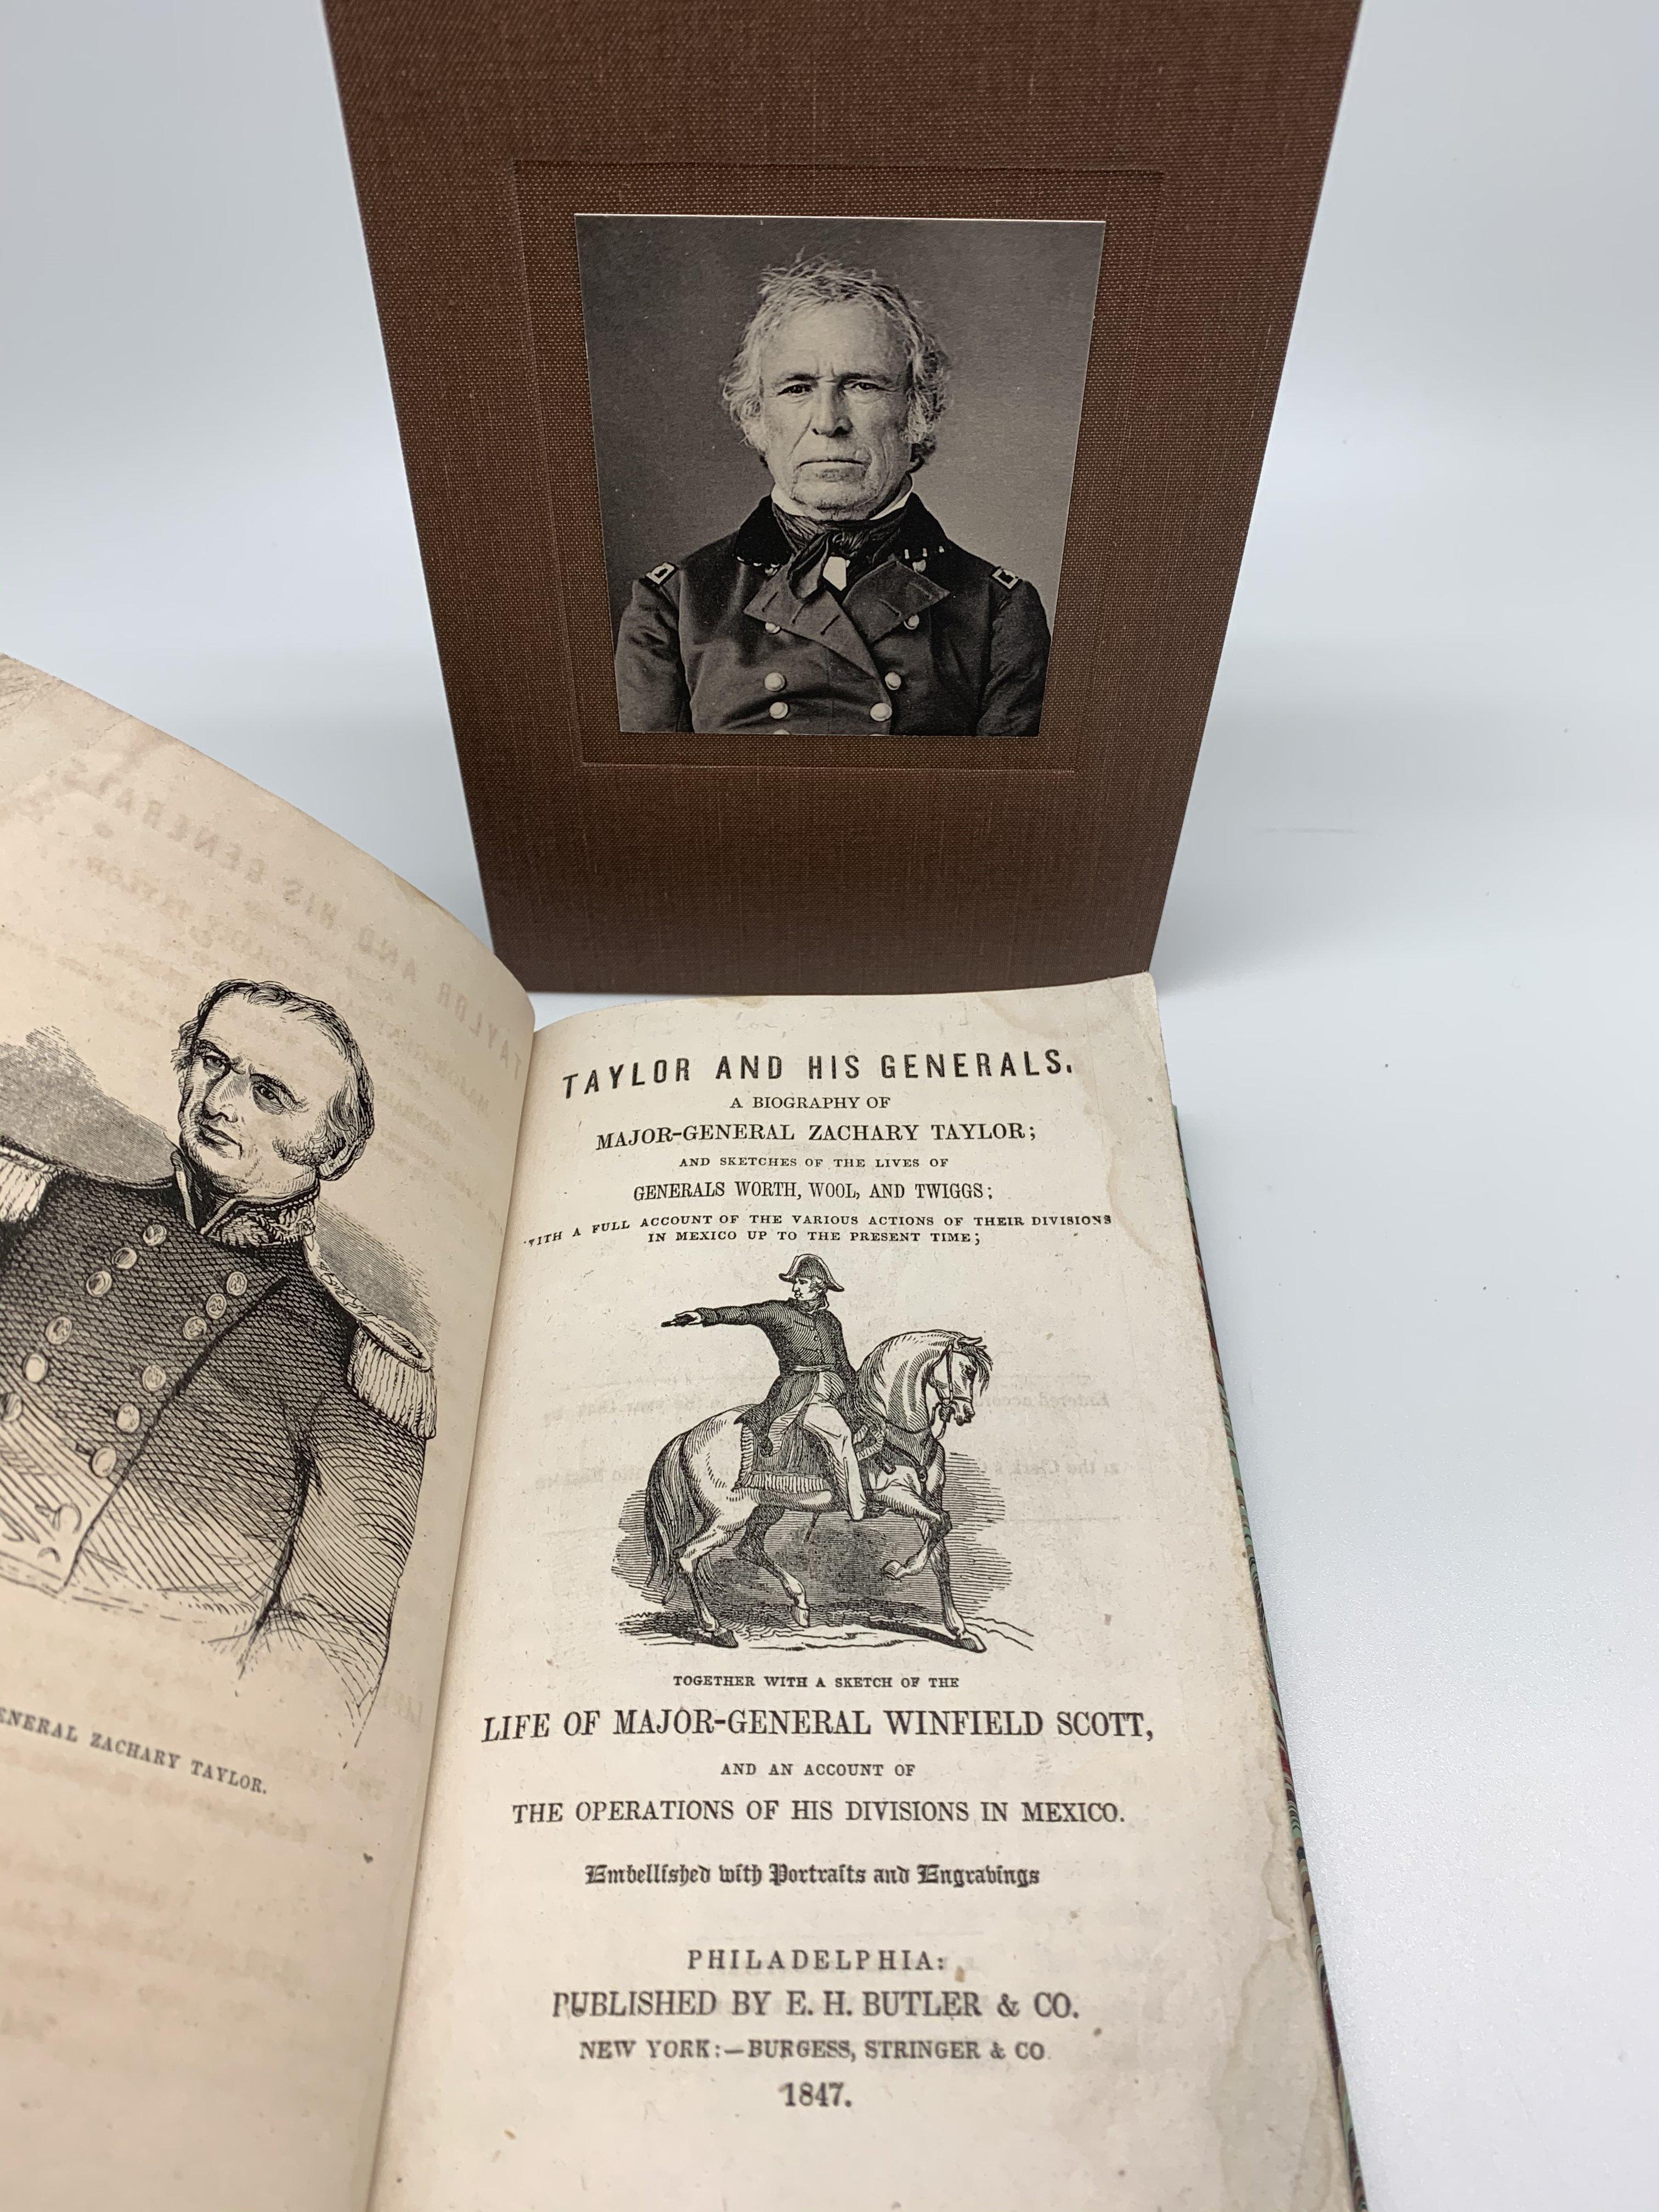 Taylor and his Generals. New York: E.H. Butler & Co., 1847. First Edition. Rebound in quarter leather and marble paper boards. Housed in custom slipcase.

Presented is the 1847 First Edition of Taylor and His Generals. Published by E.H. Butler &